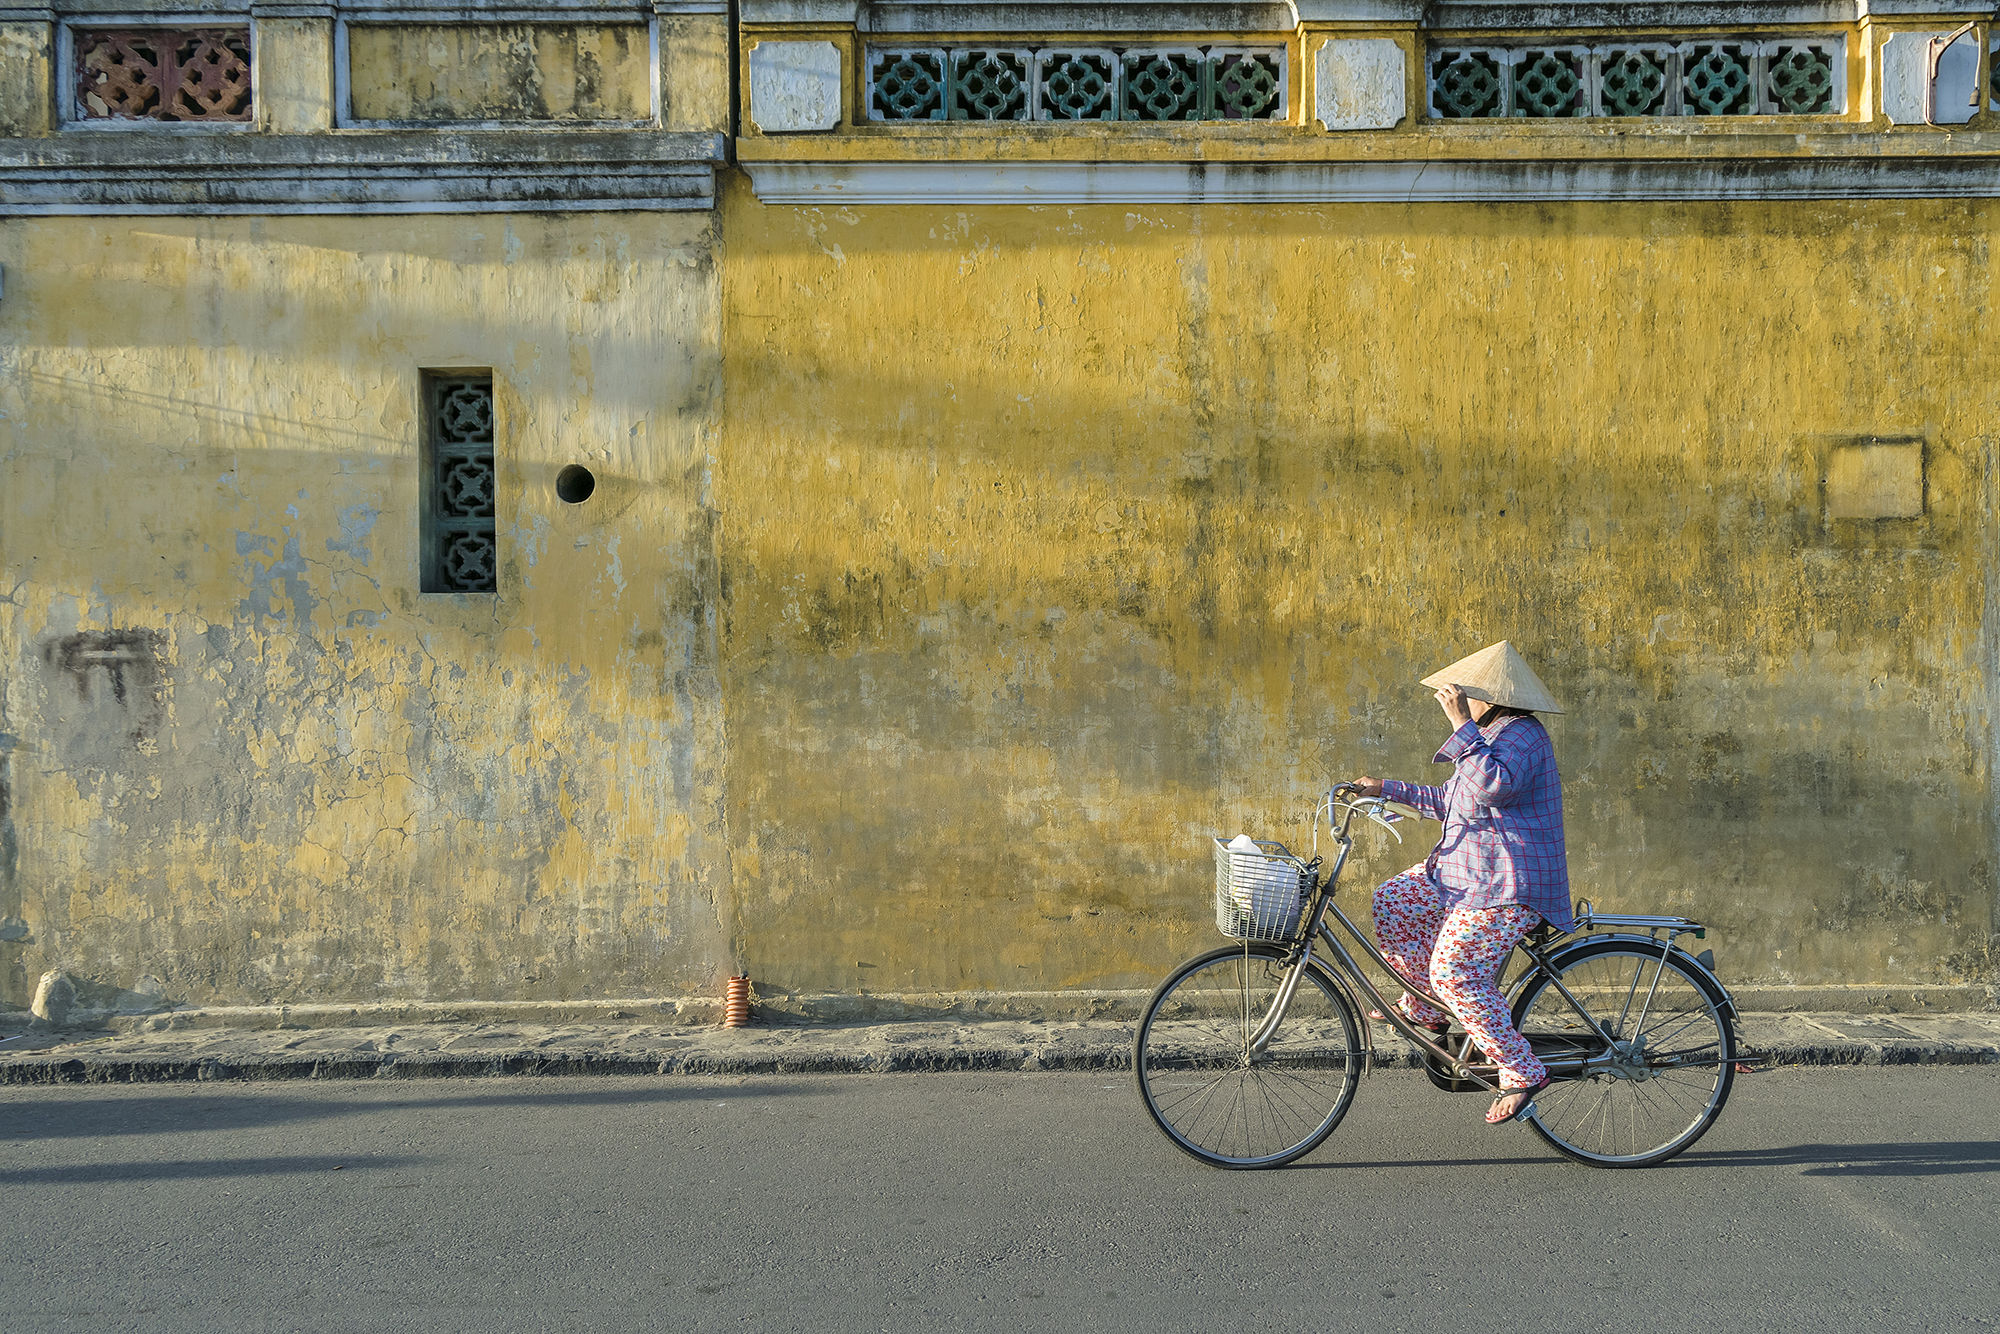 Check out: Hue, Vietnam’s former imperial capital